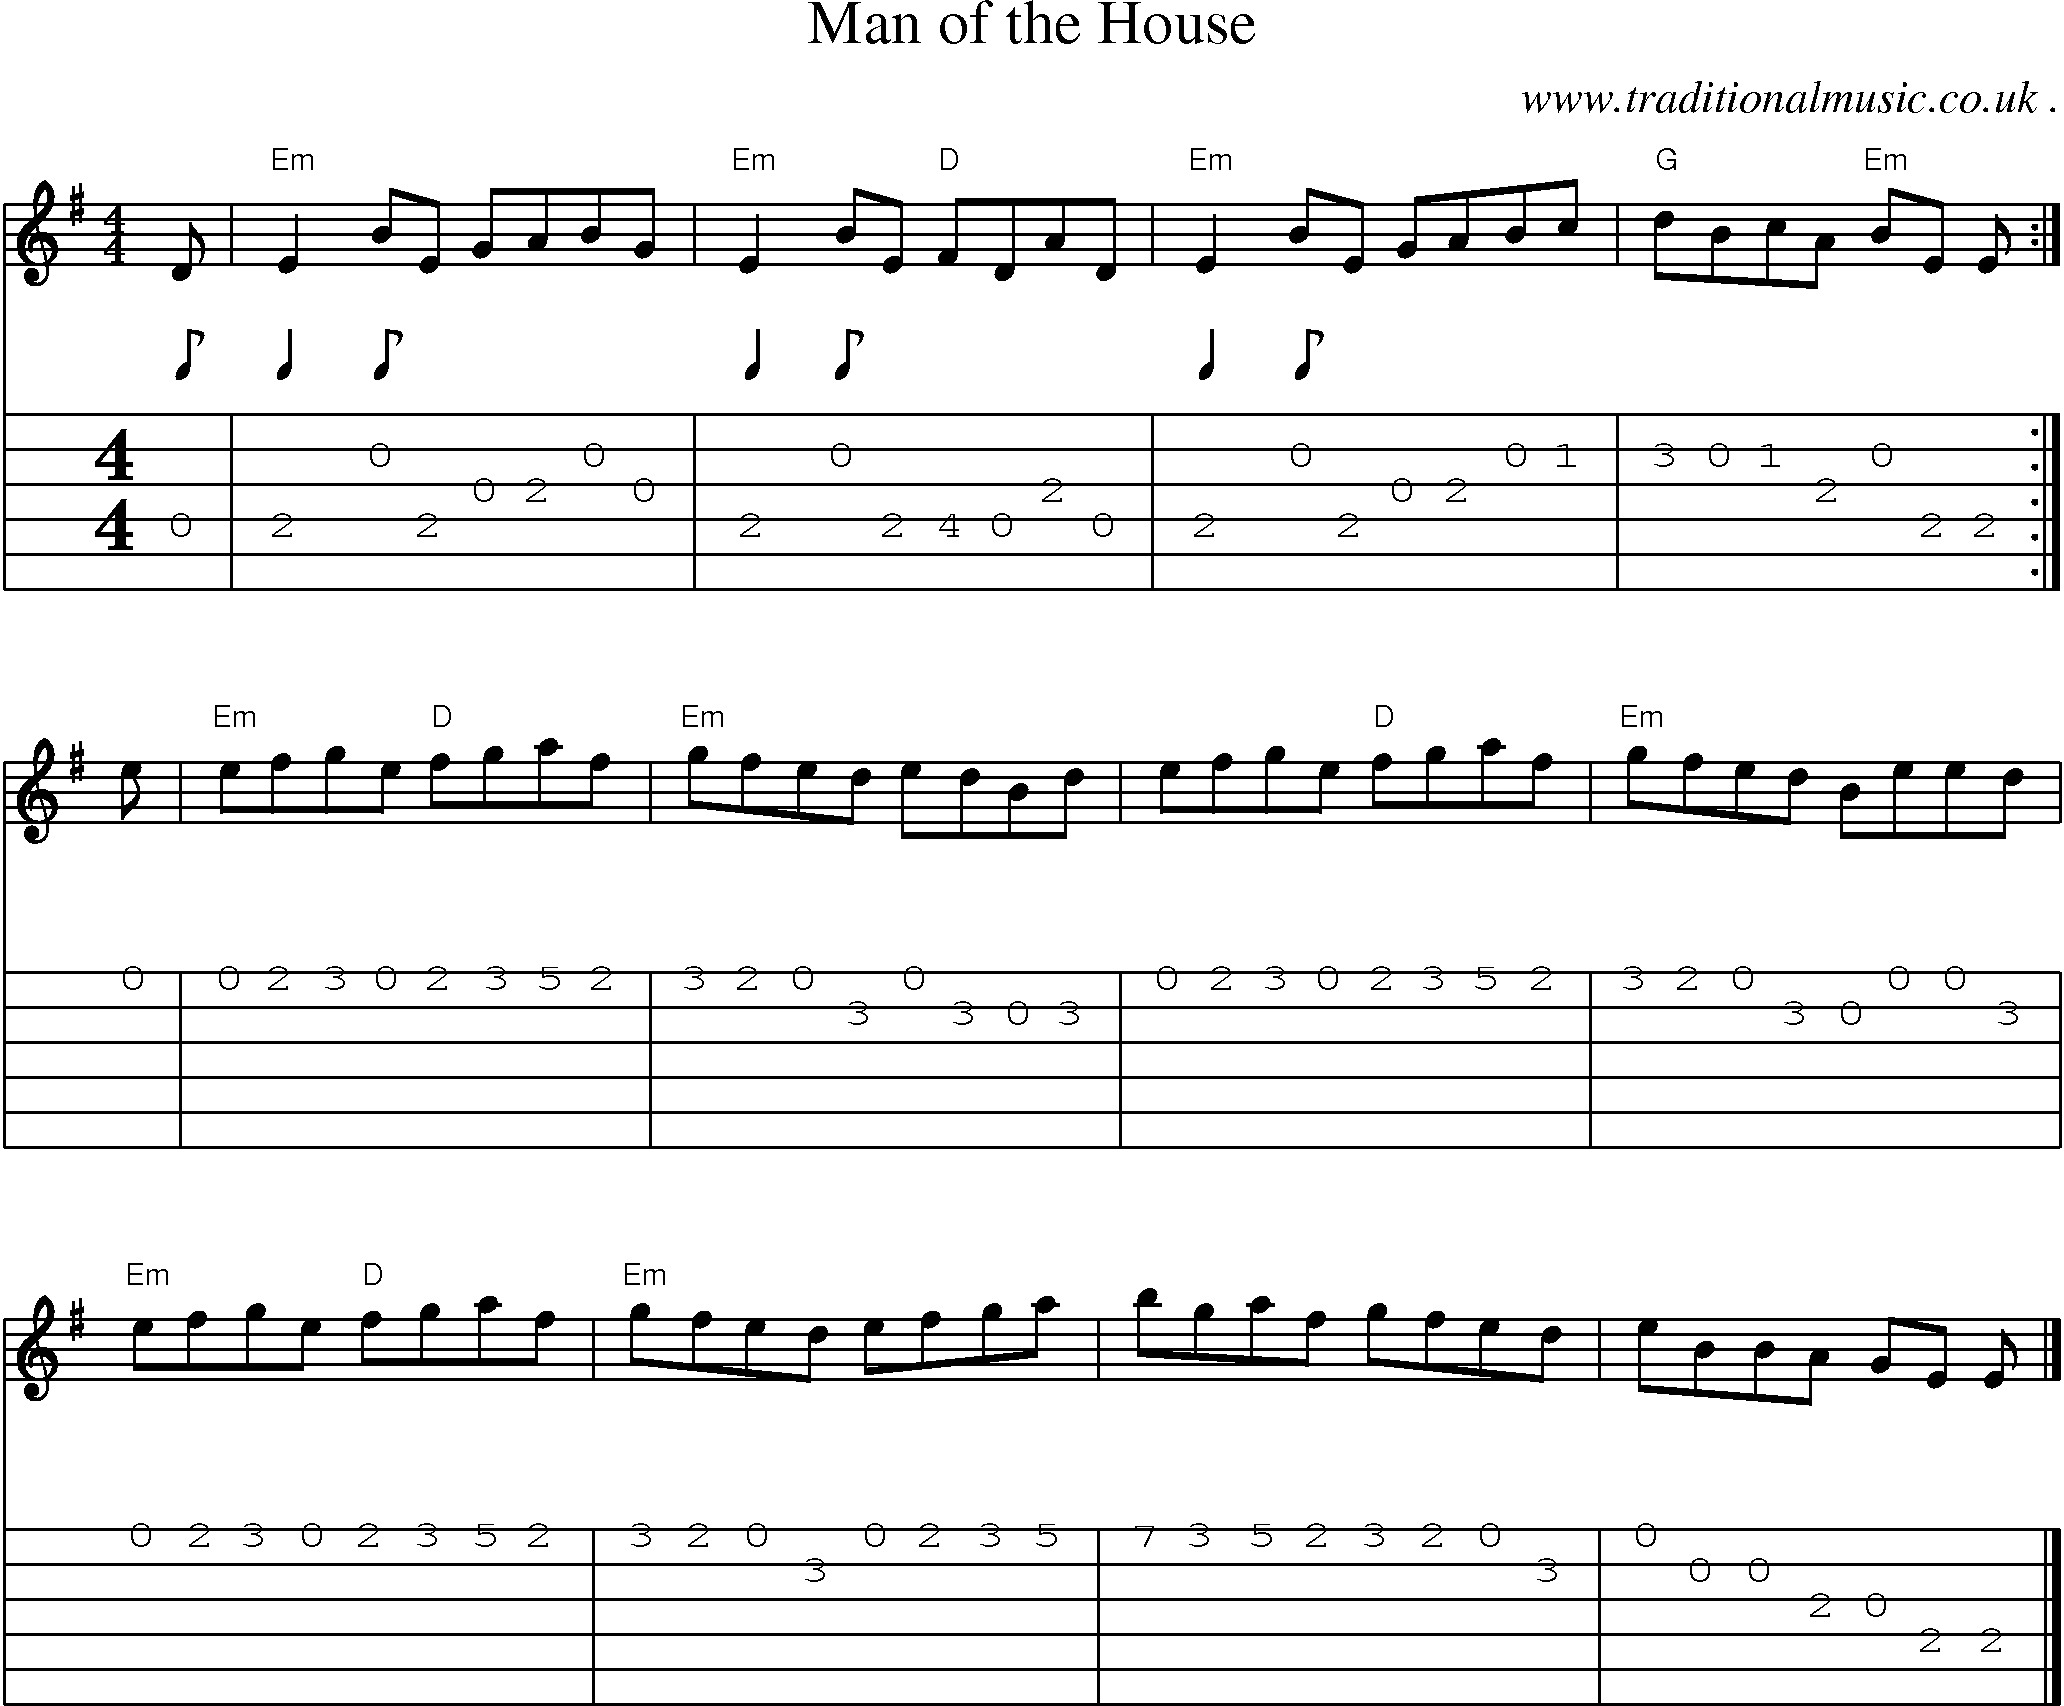 Music Score and Guitar Tabs for Man of the House